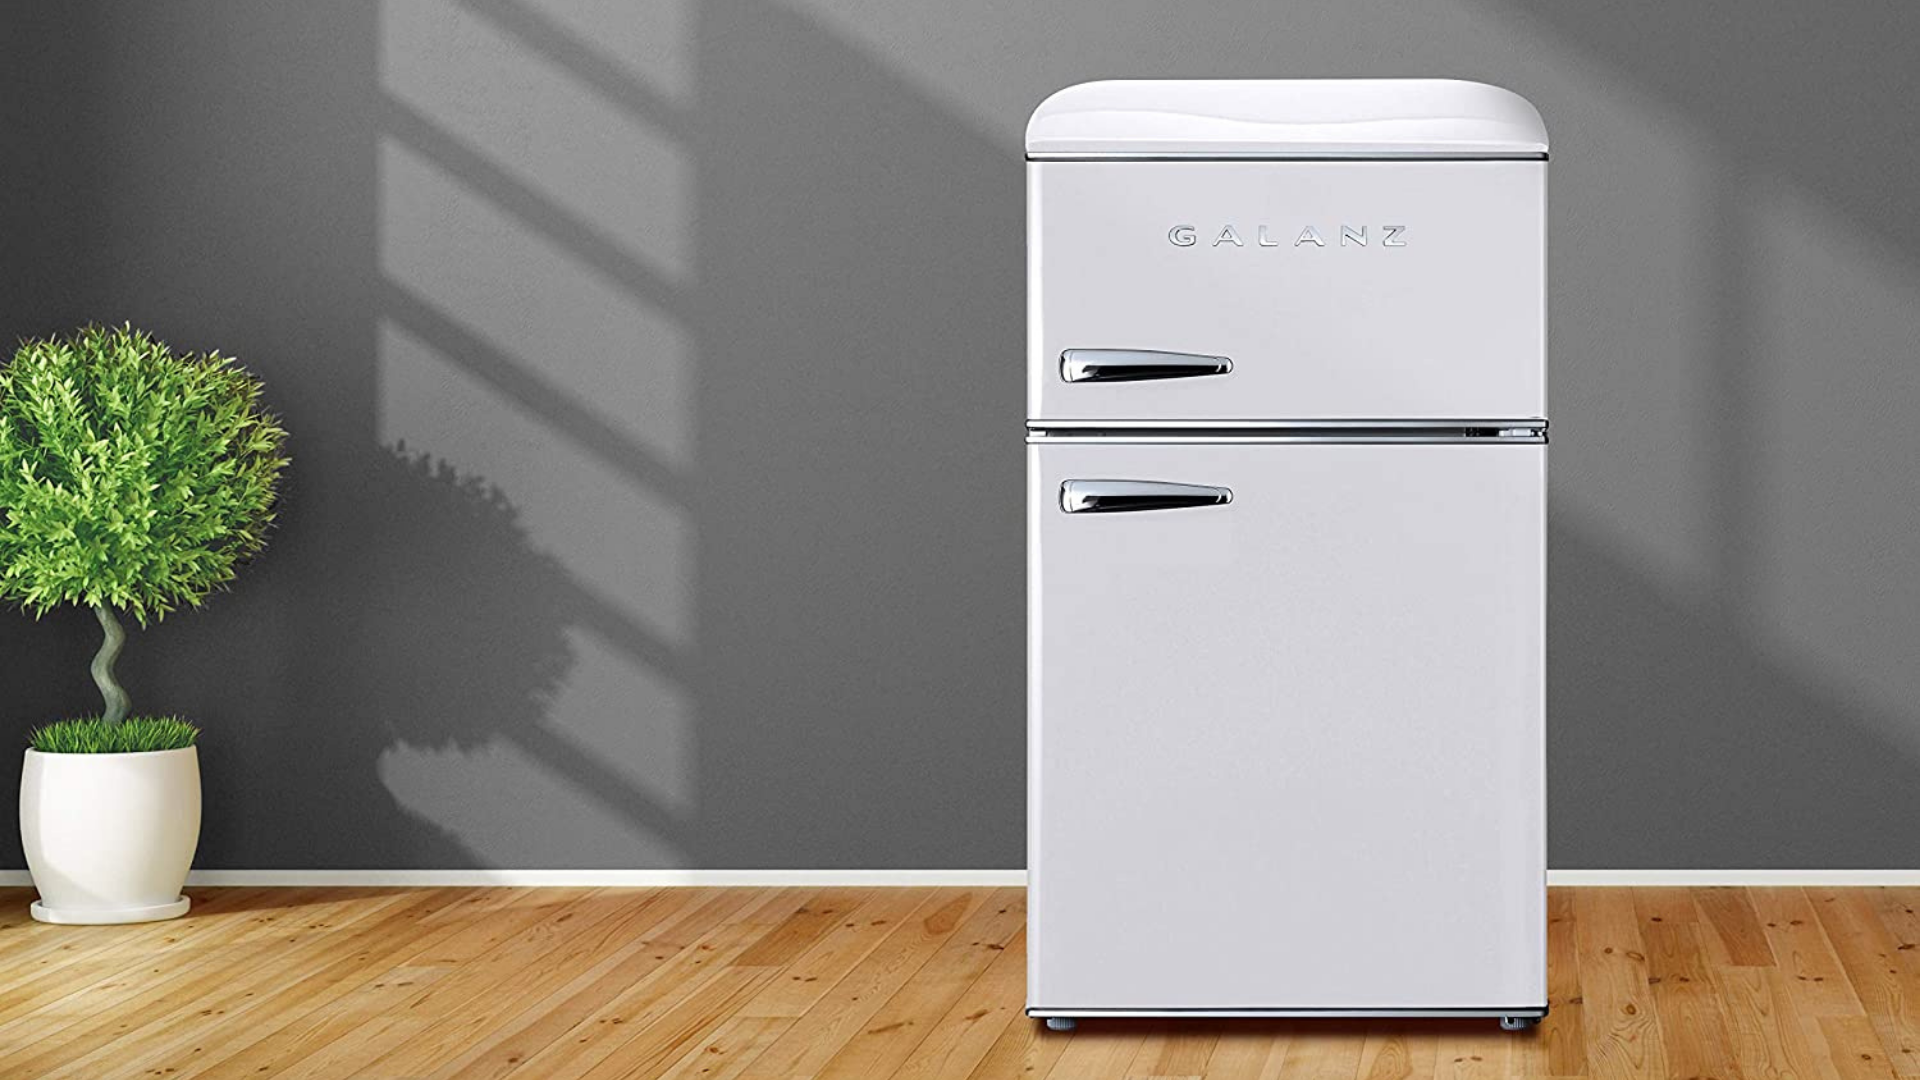 Just because something is practical doesn't mean it has to be boring. Buy a mini fridge with flair like the Galanz GLR31TBEER Retro.